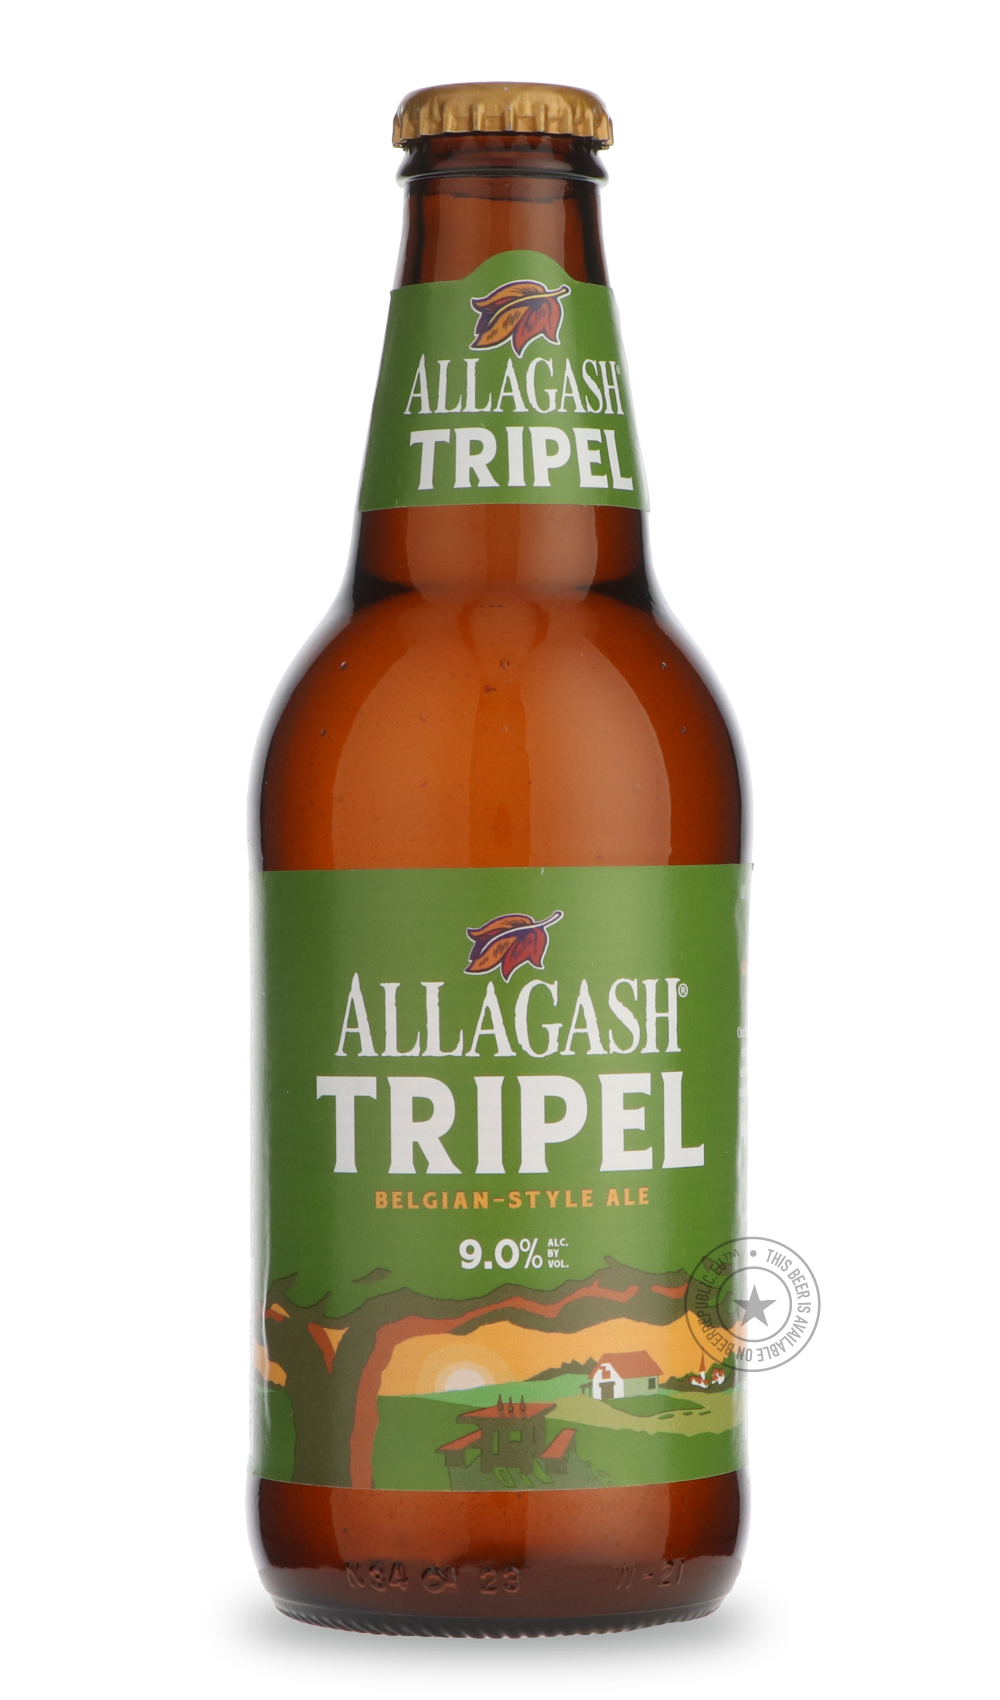 -Allagash- Tripel-Pale- Only @ Beer Republic - The best online beer store for American & Canadian craft beer - Buy beer online from the USA and Canada - Bier online kopen - Amerikaans bier kopen - Craft beer store - Craft beer kopen - Amerikanisch bier kaufen - Bier online kaufen - Acheter biere online - IPA - Stout - Porter - New England IPA - Hazy IPA - Imperial Stout - Barrel Aged - Barrel Aged Imperial Stout - Brown - Dark beer - Blond - Blonde - Pilsner - Lager - Wheat - Weizen - Amber - Barley Wine - 